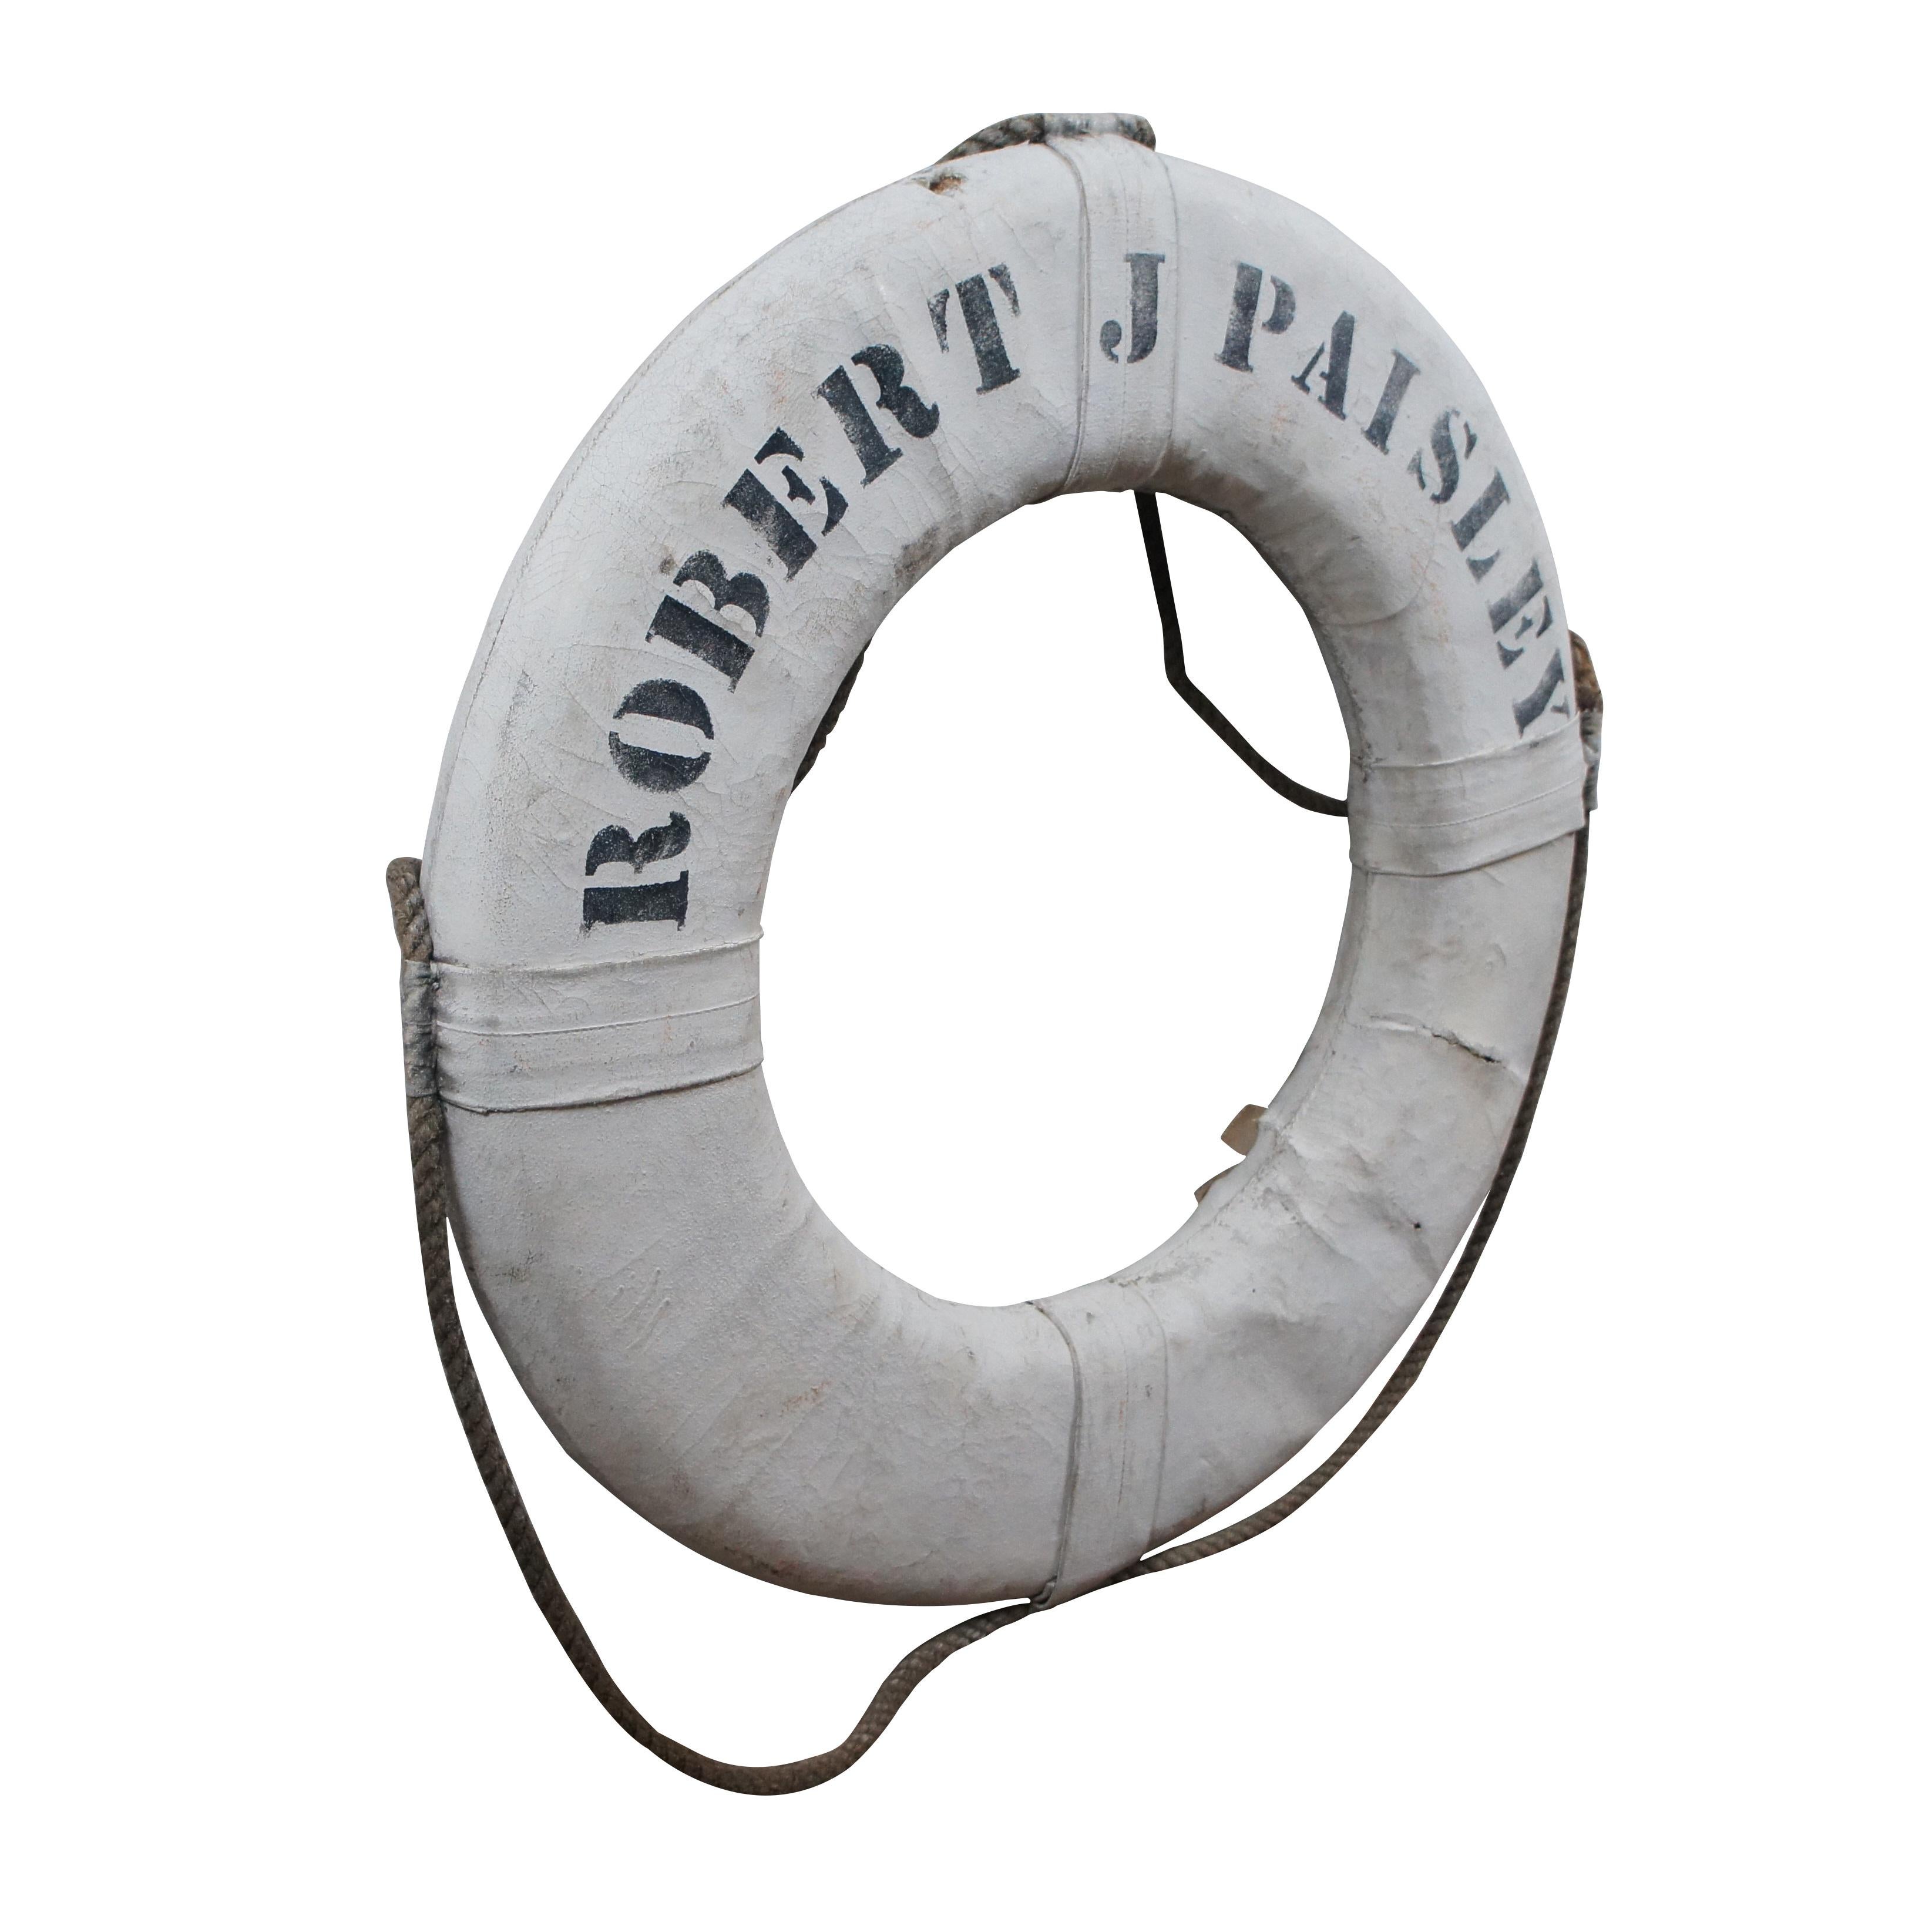 Antique Robert J. Paisley boat life preserver buoy saftey ring featuring a hard foam core with a white painted canvas cover and hemp rope handles. 

